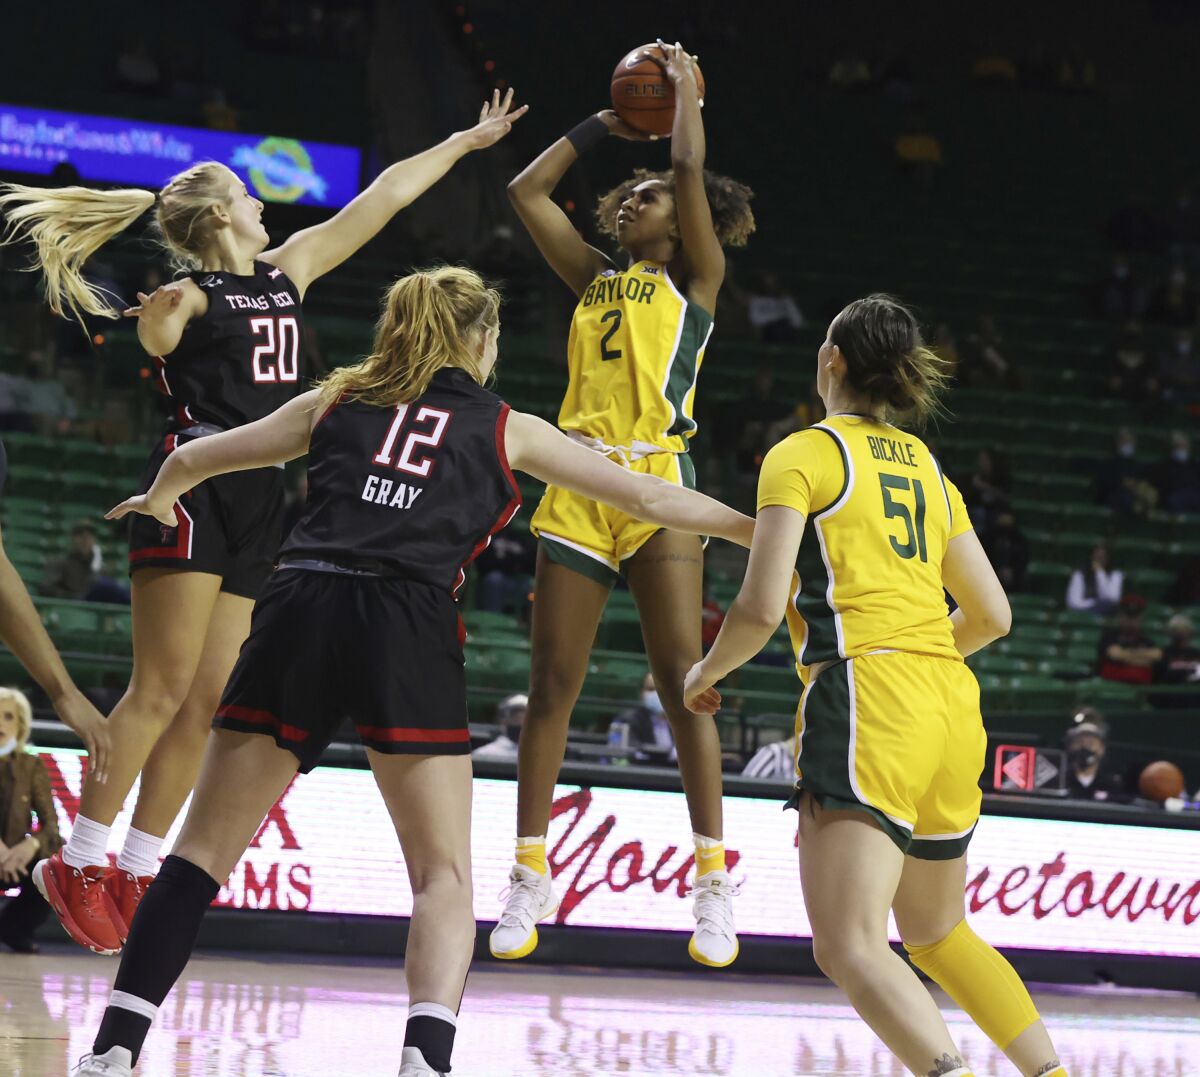 Baylor guard DiDi Richards, center, looks to the basket while shooting against Texas Tech forward Bryn Gerlich , left, in the second half of an NCAA college basketball game, Monday, Dec. 14, 2020, in Waco, Texas. (Rod Aydelotte/Waco Tribune-Herald via AP)